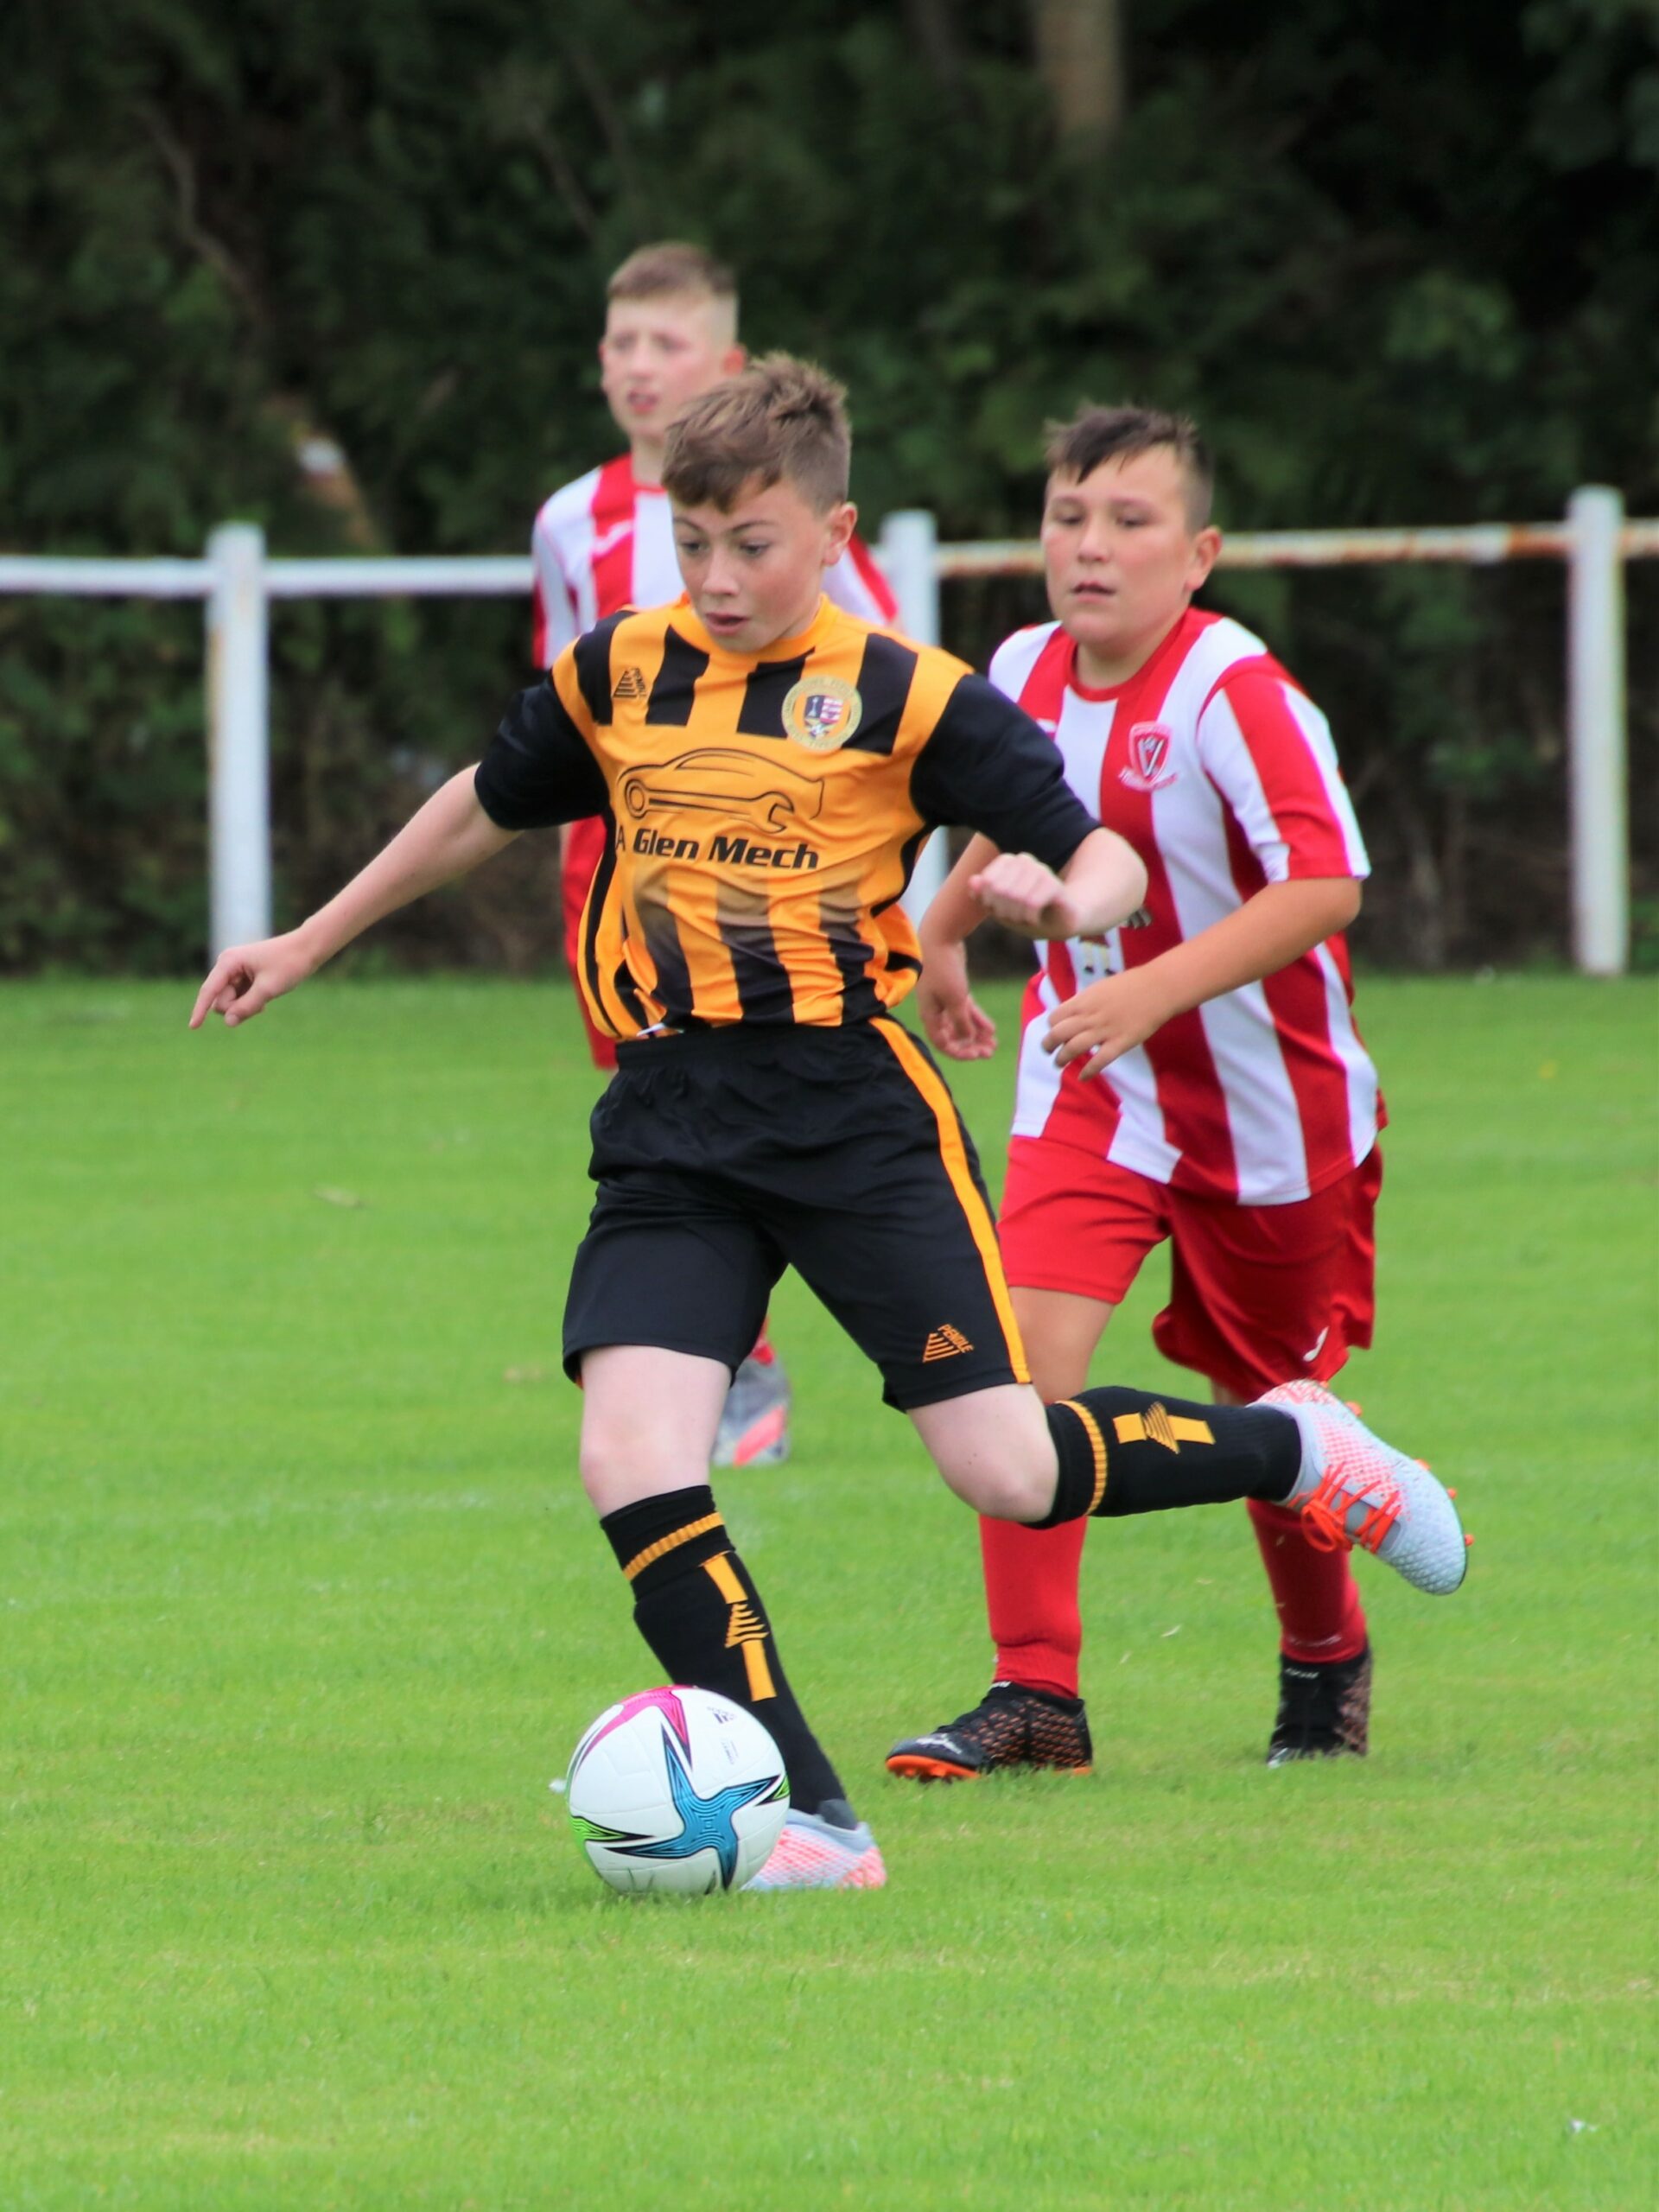 Pupils Youth kick off league wins in 10-goal thriller